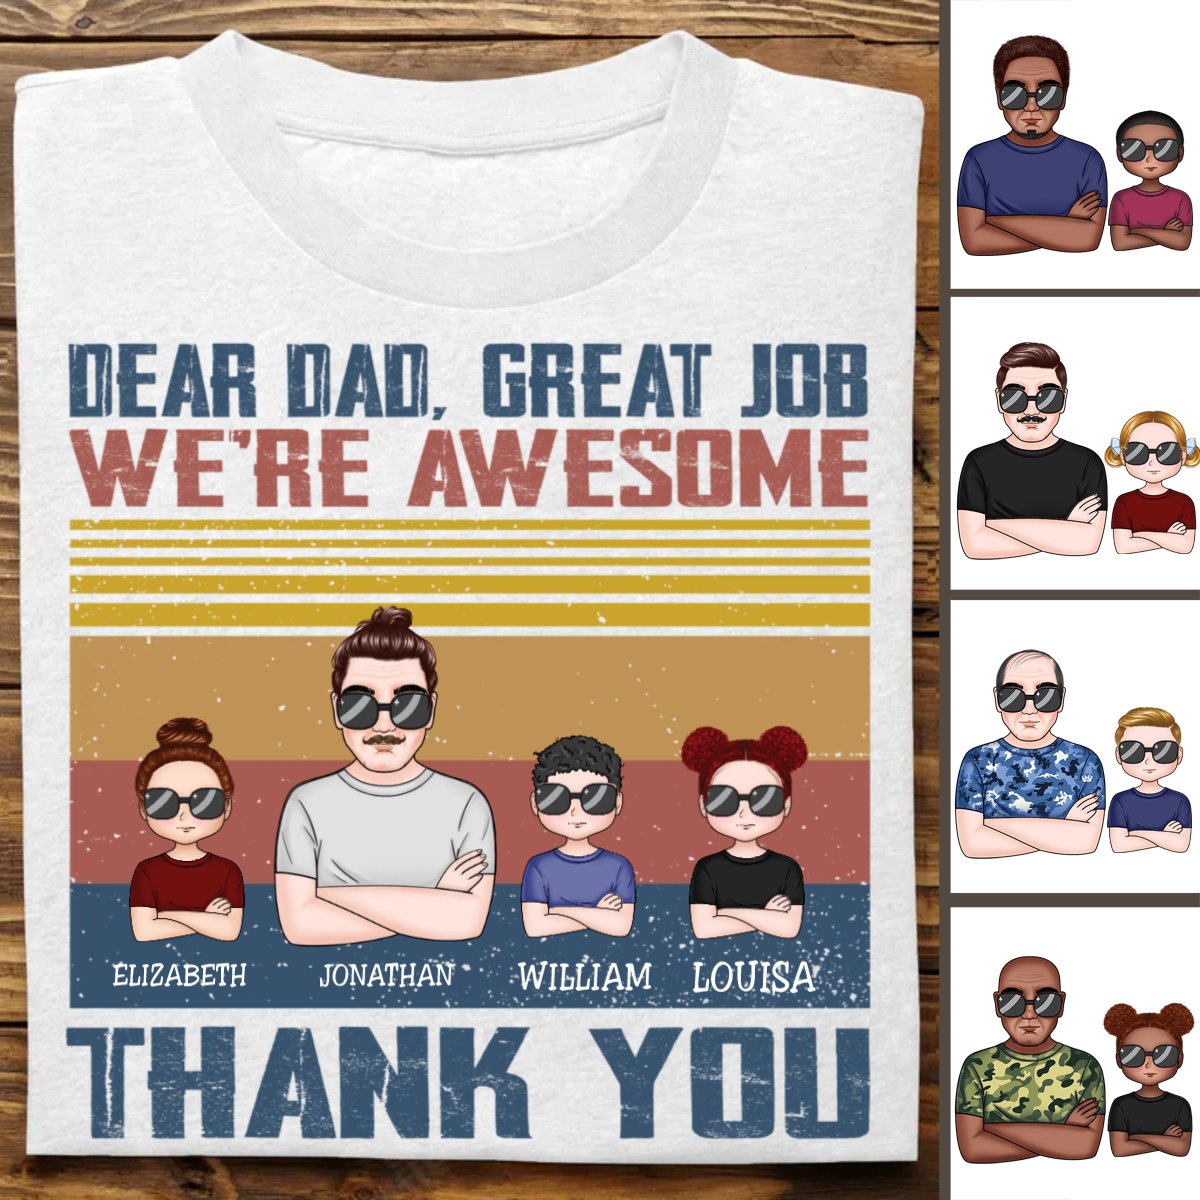 Discover Family - Dear Dad Great Job I'm Awesome Thank You - Personalized T-shirt